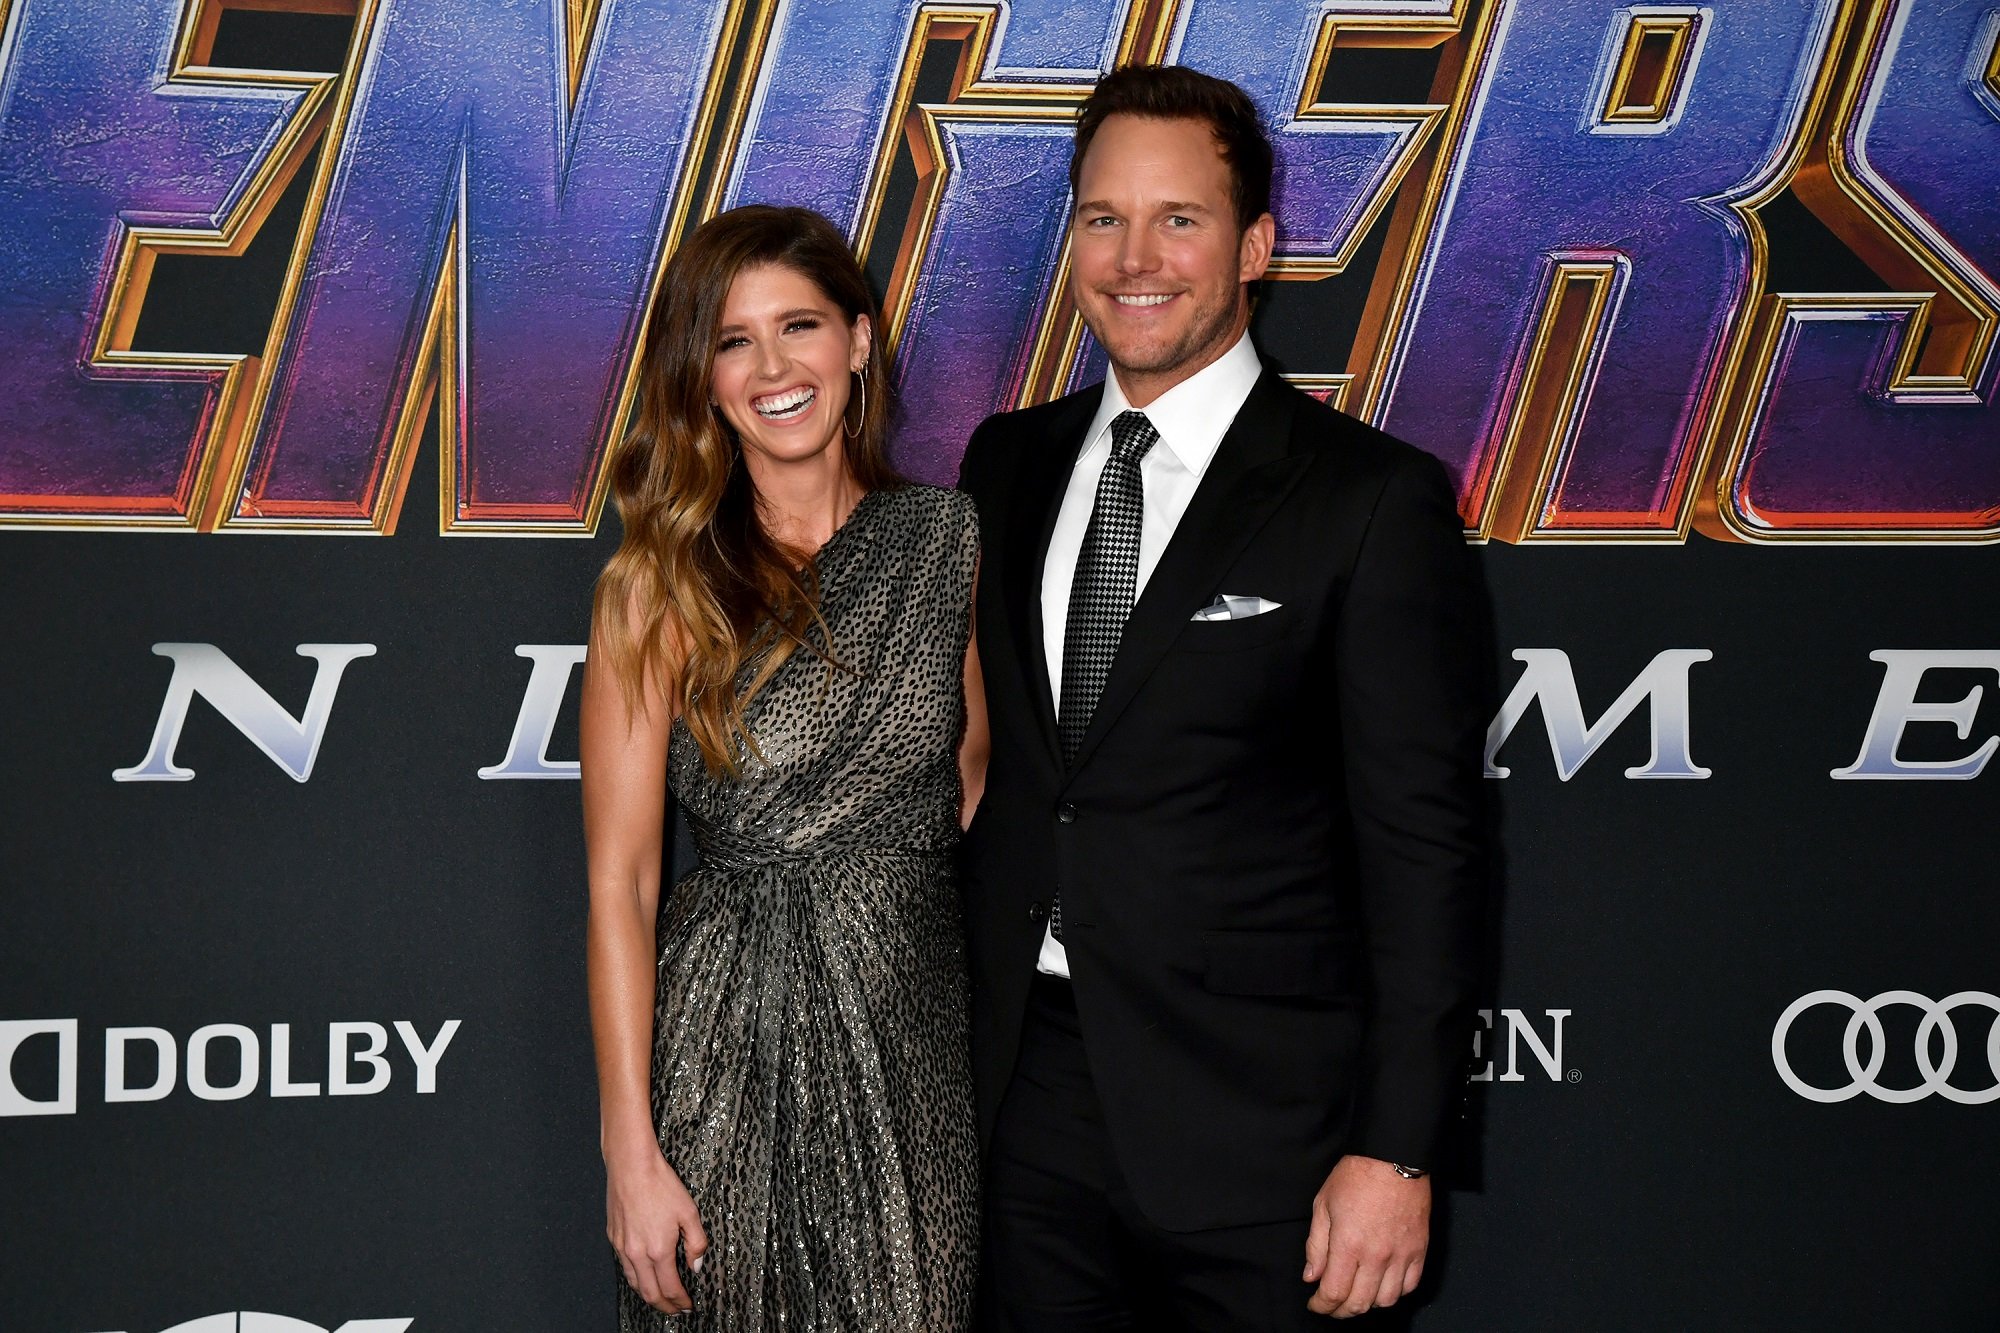 Chris Pratt and Katherine Schwarzenegger Announce Their Daughter’s Birth: Who Is She Named After?